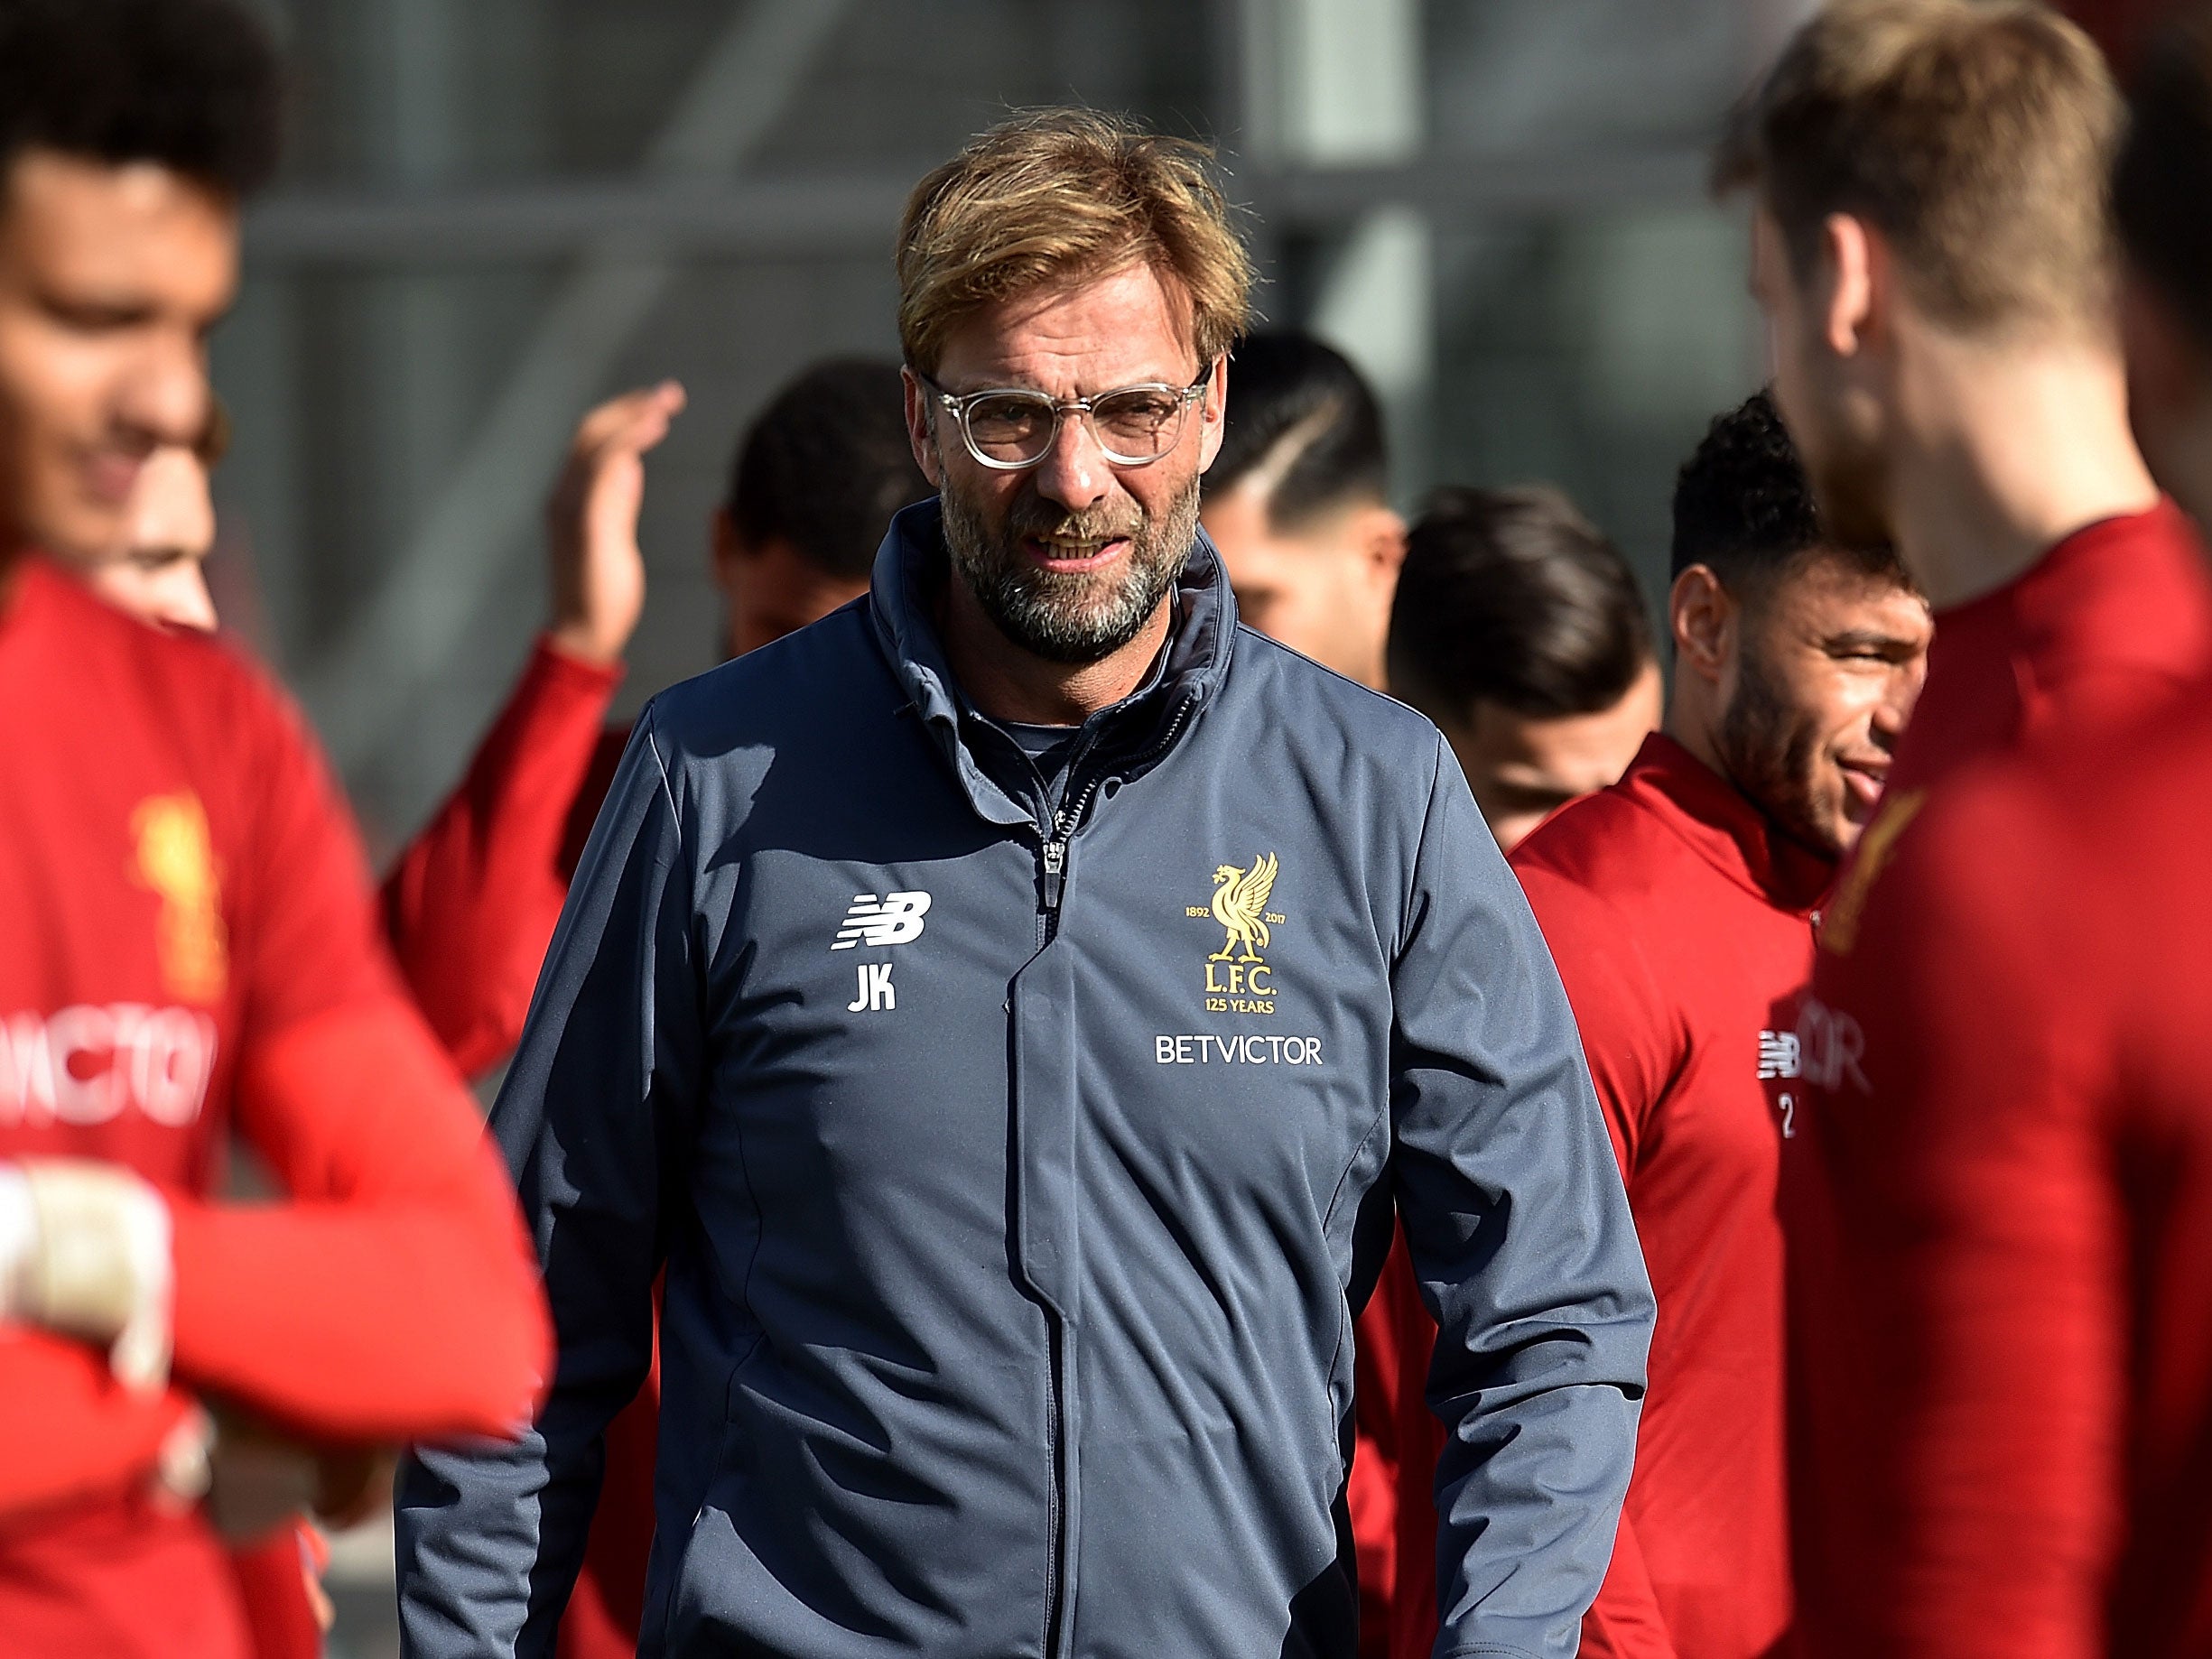 Jurgen Klopp's side have made an indifferent start to the new season